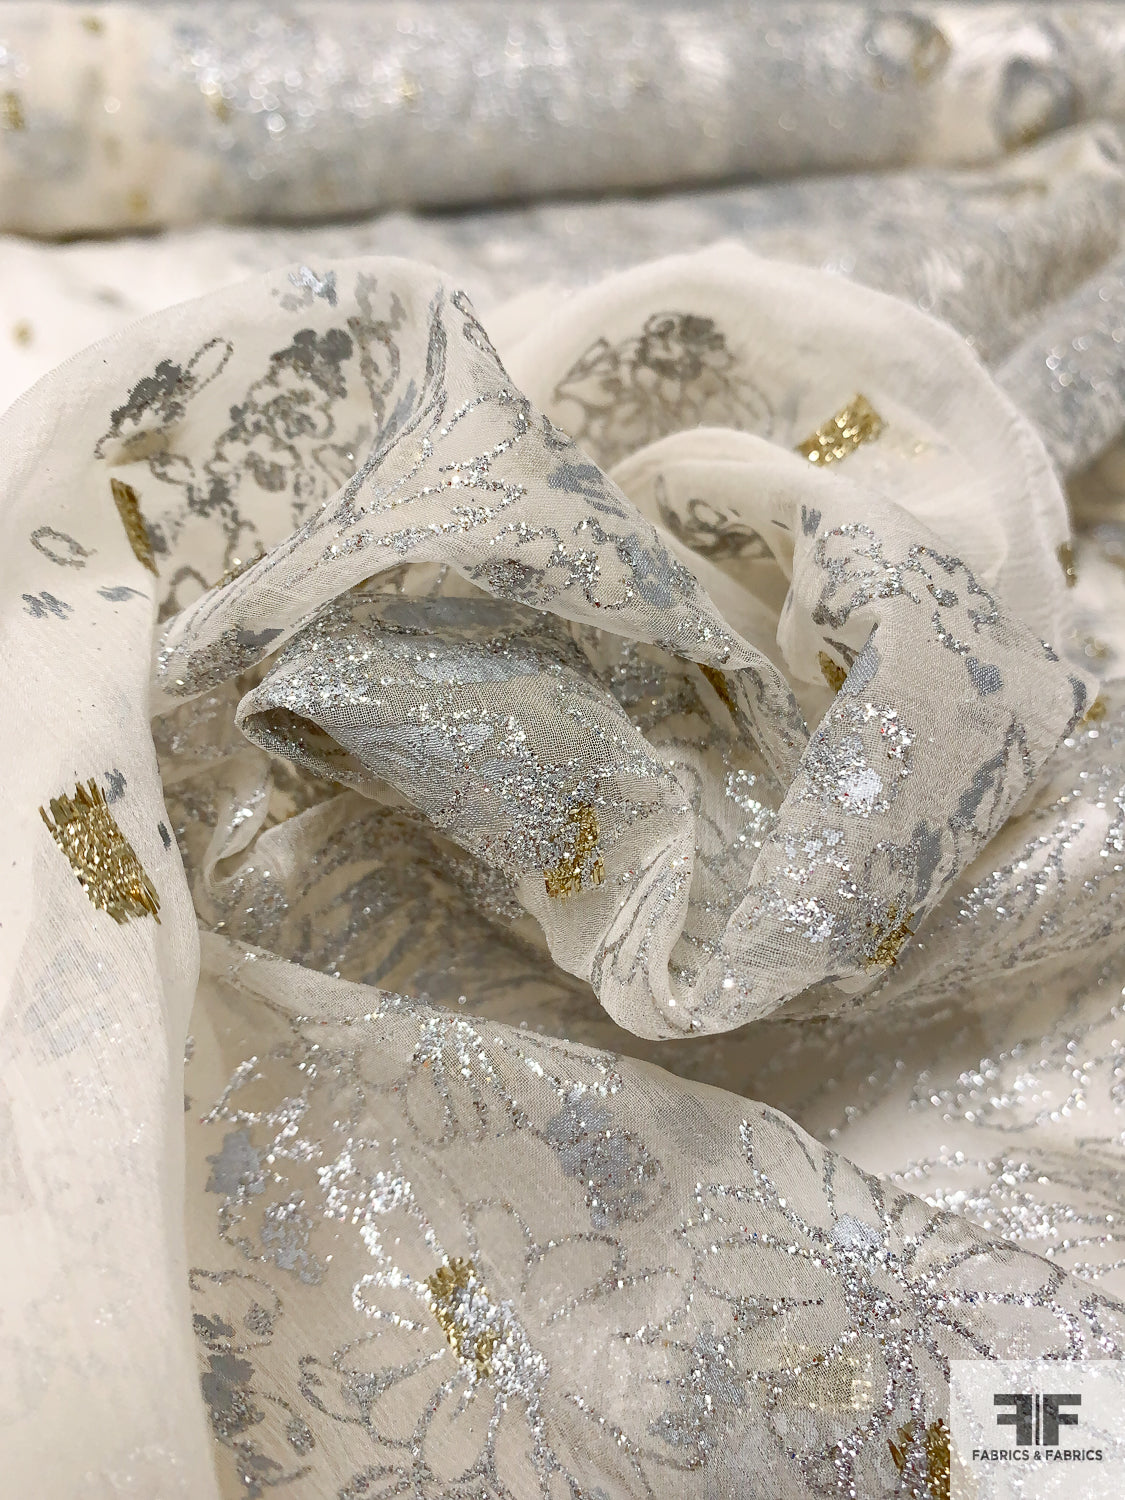 details of design; gold and silver fabric paint and foil